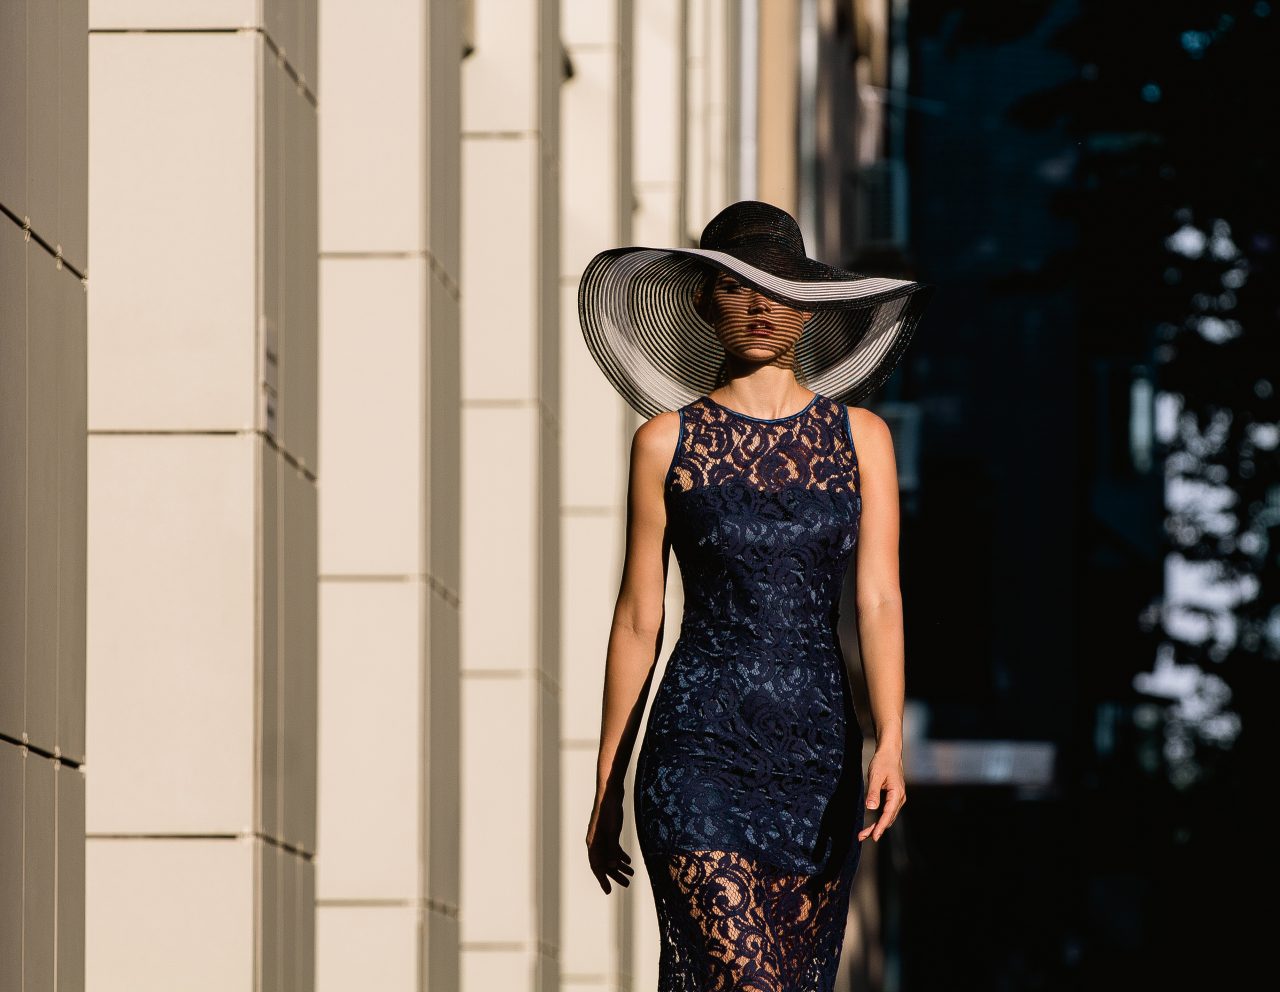 Young,Woman,In,Black,Lace,Dress,And,A,Hat,With